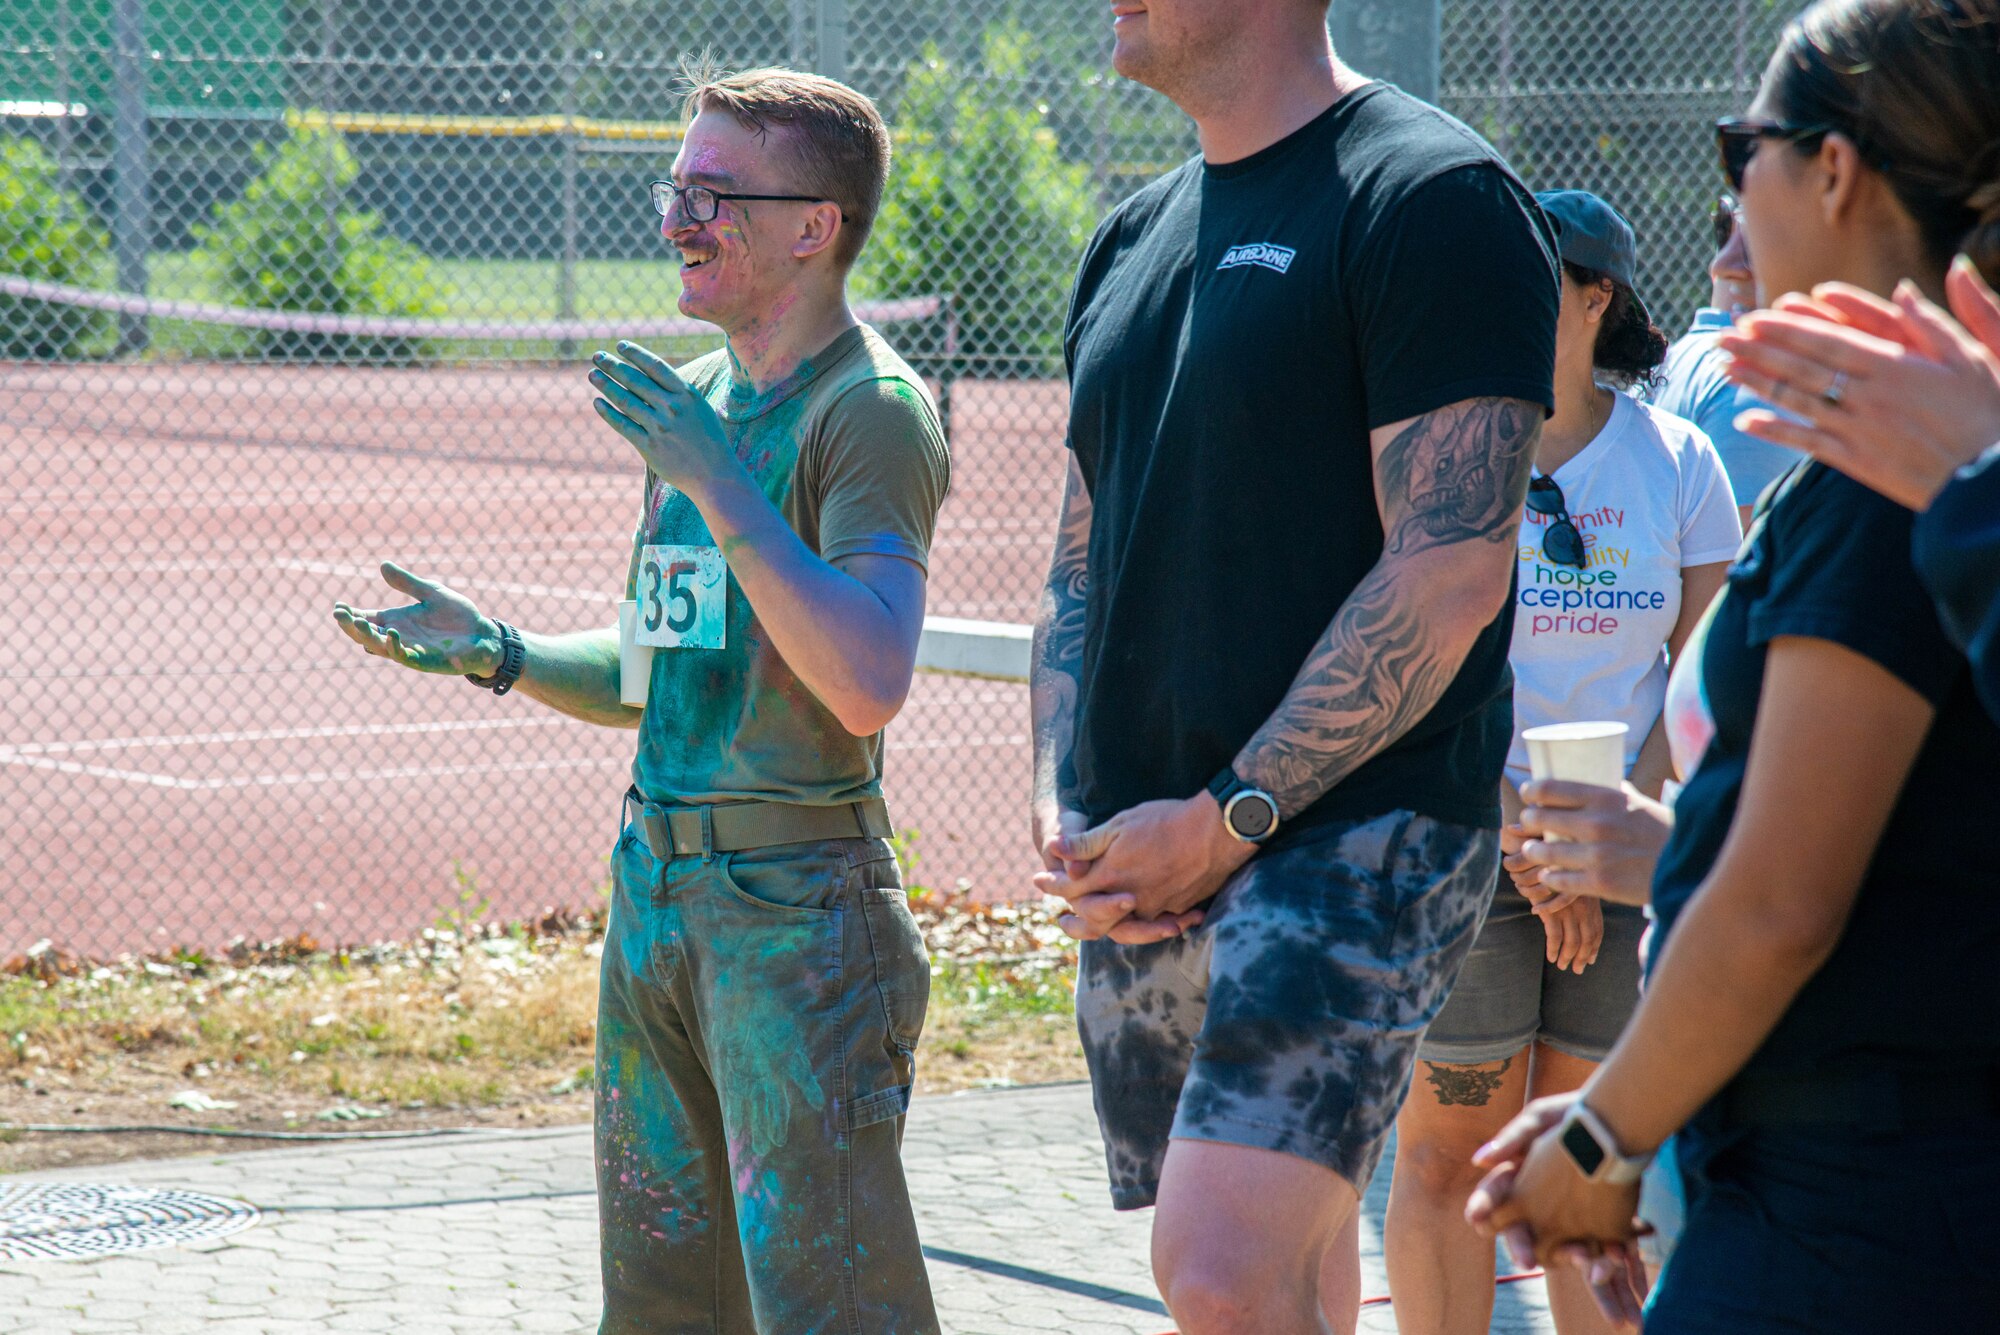 Airman claps for the winners of the color run